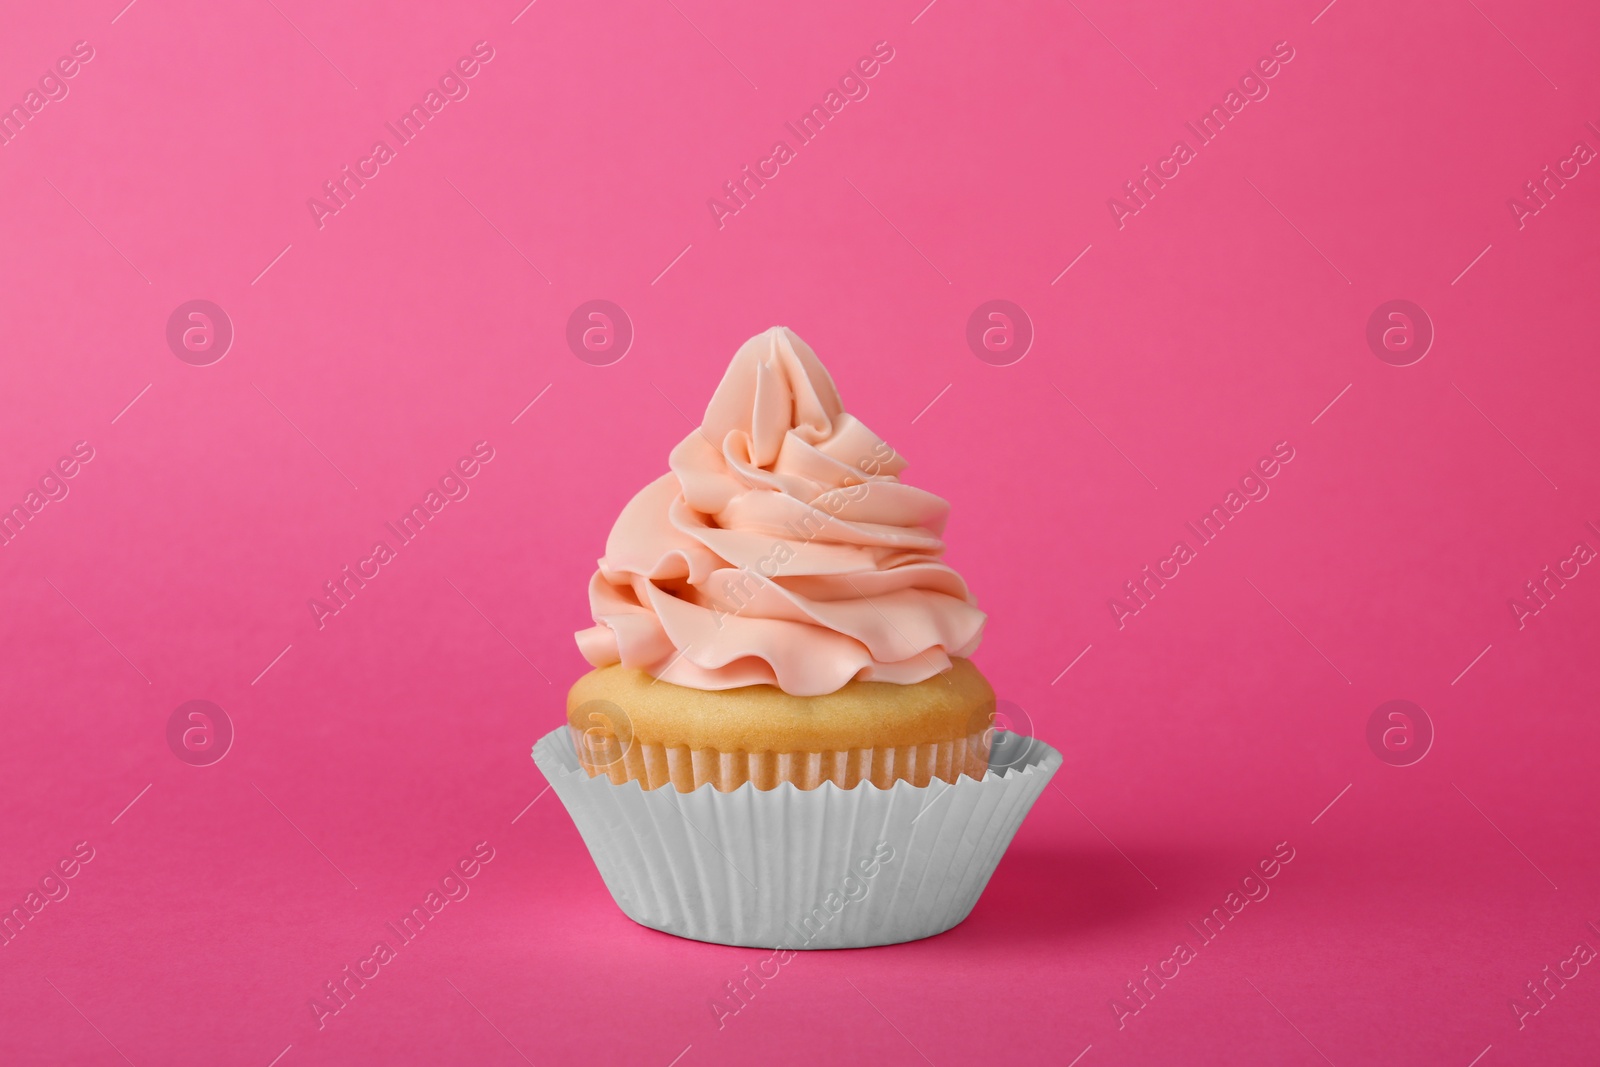 Photo of Tasty cupcake decorated with cream on pink background